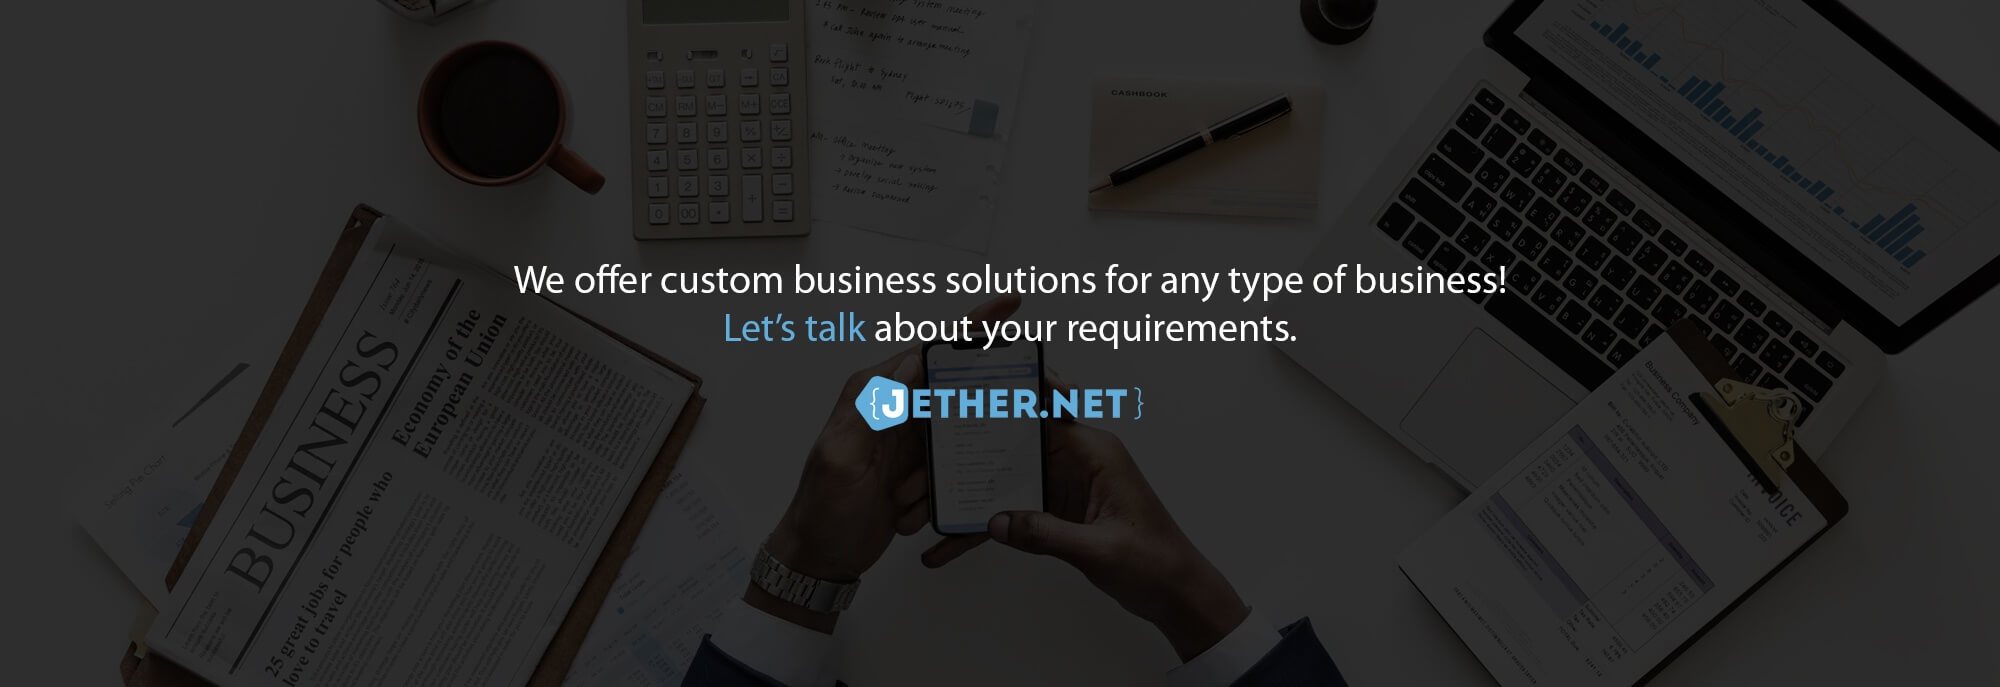 We offer custom business solutions for any type of business